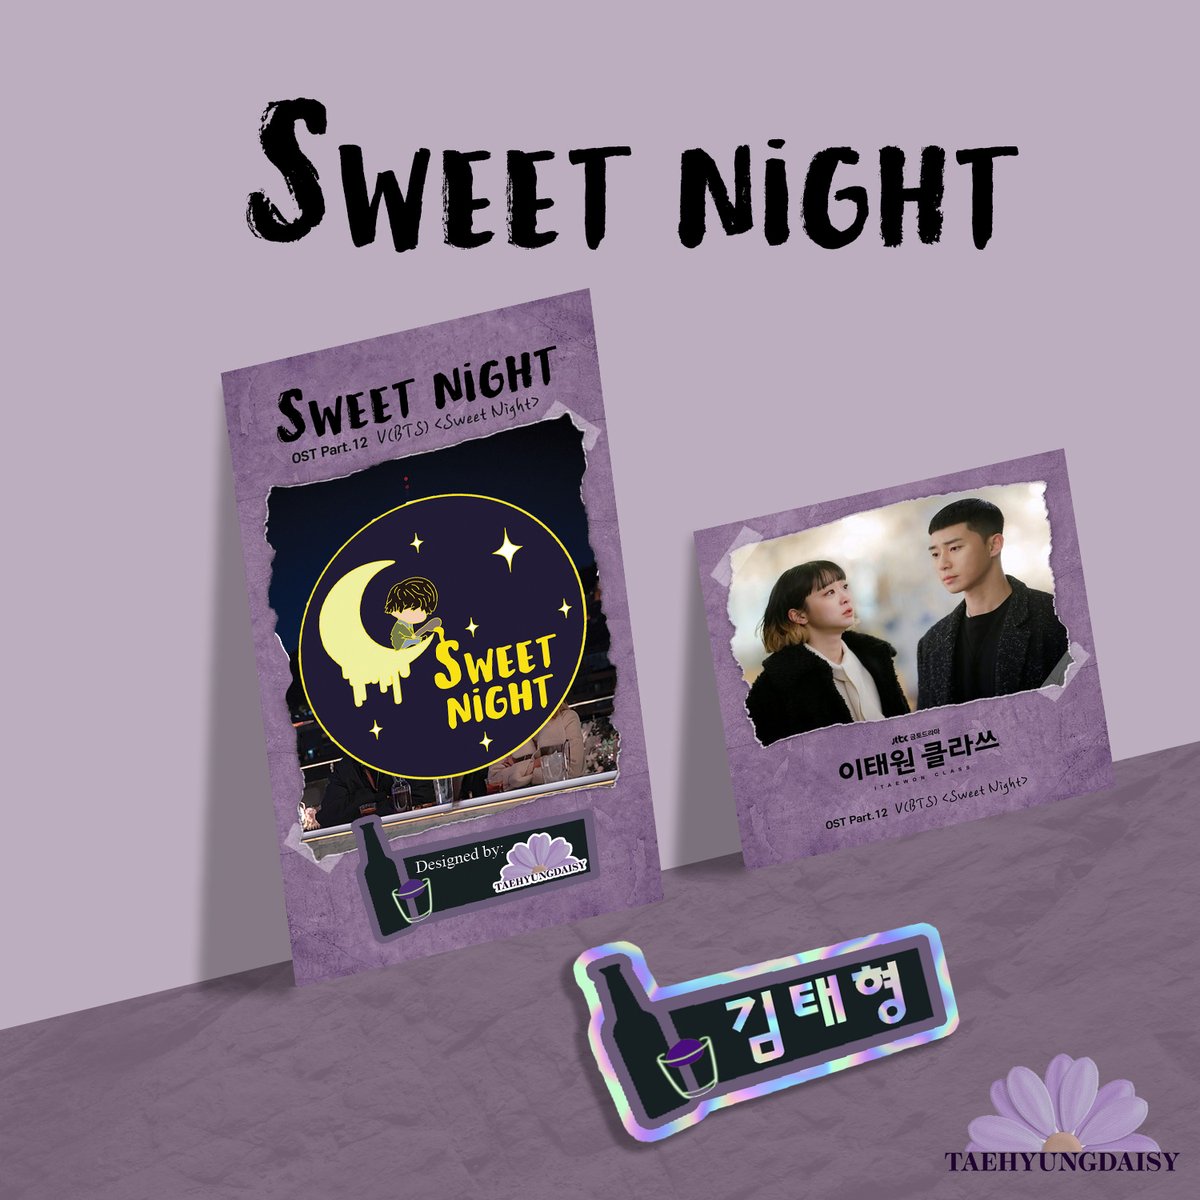 SHOP IS NOW OPEN FOR ORDERS!LOVE IS MUTUAL: taekook beret [$15]SWEET NIGHT: taehyung pin [$10]Check out my shop for more details: https://www.etsy.com/shop/Taehyungdaisy #LoveIsMutual  #TaekookBeret #SweetNightOST  #SweetNightPin